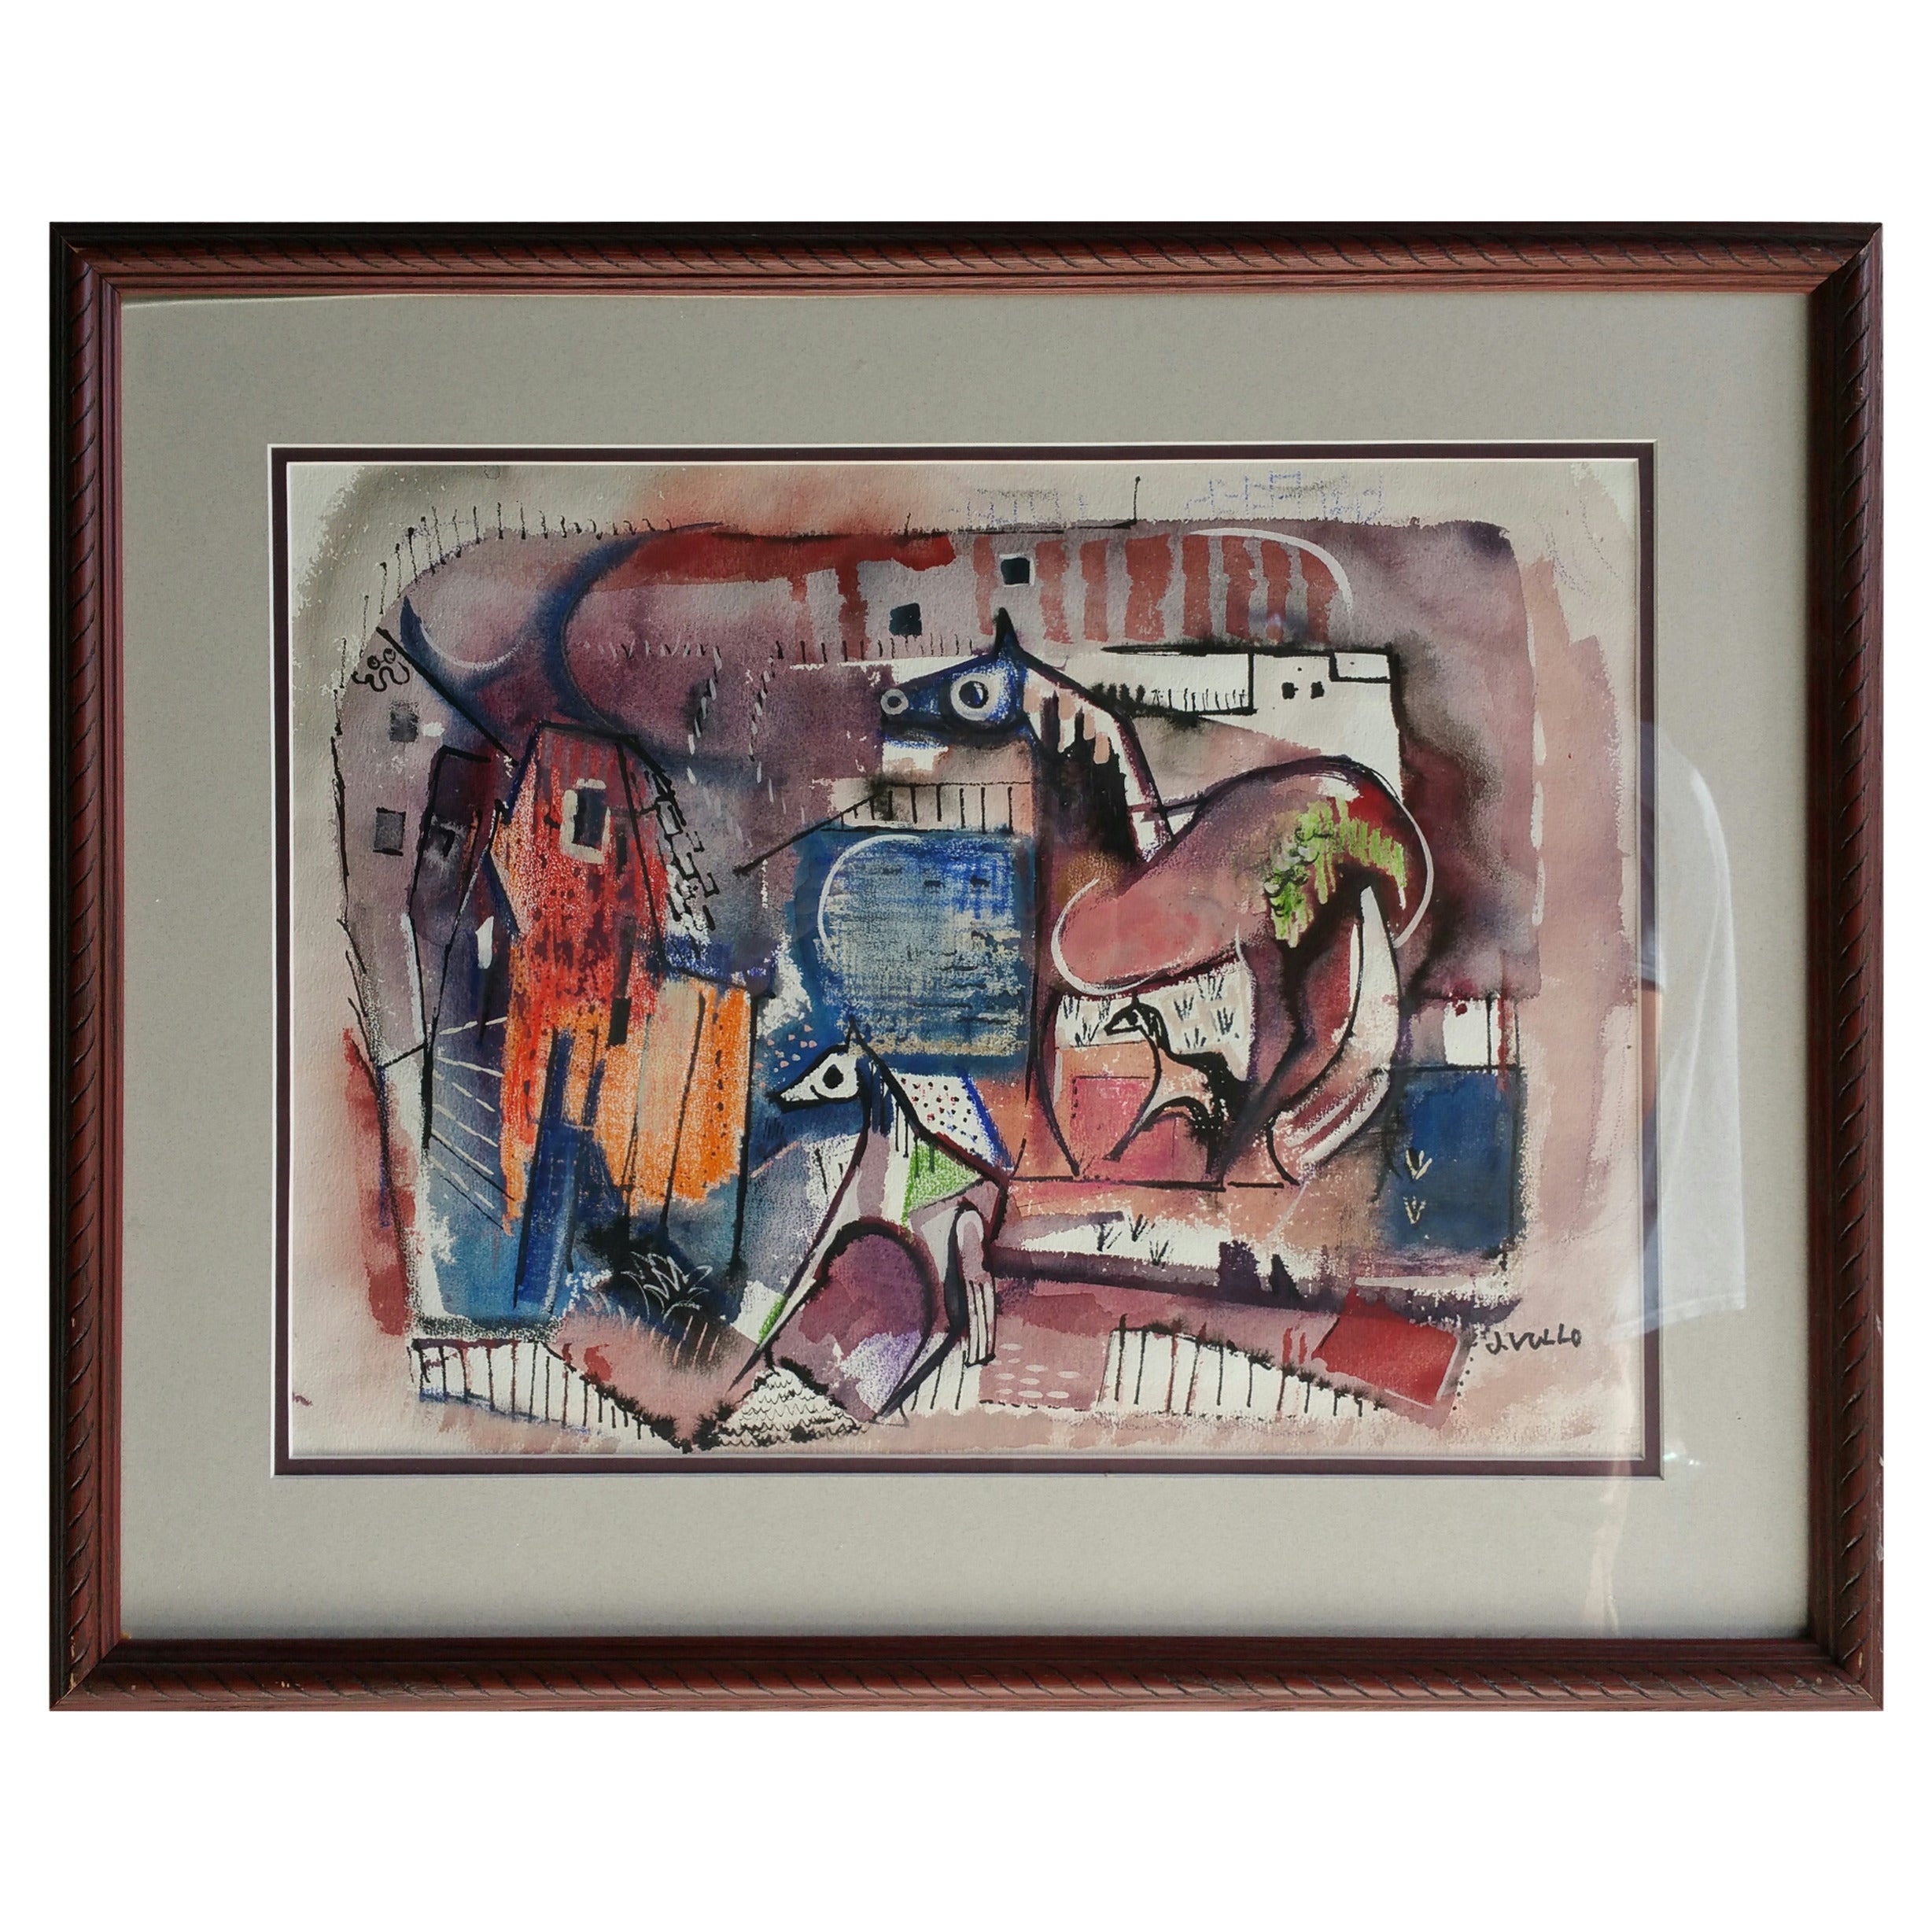 Modernist Abstract Watercolor by James Vullo, Albright Knox